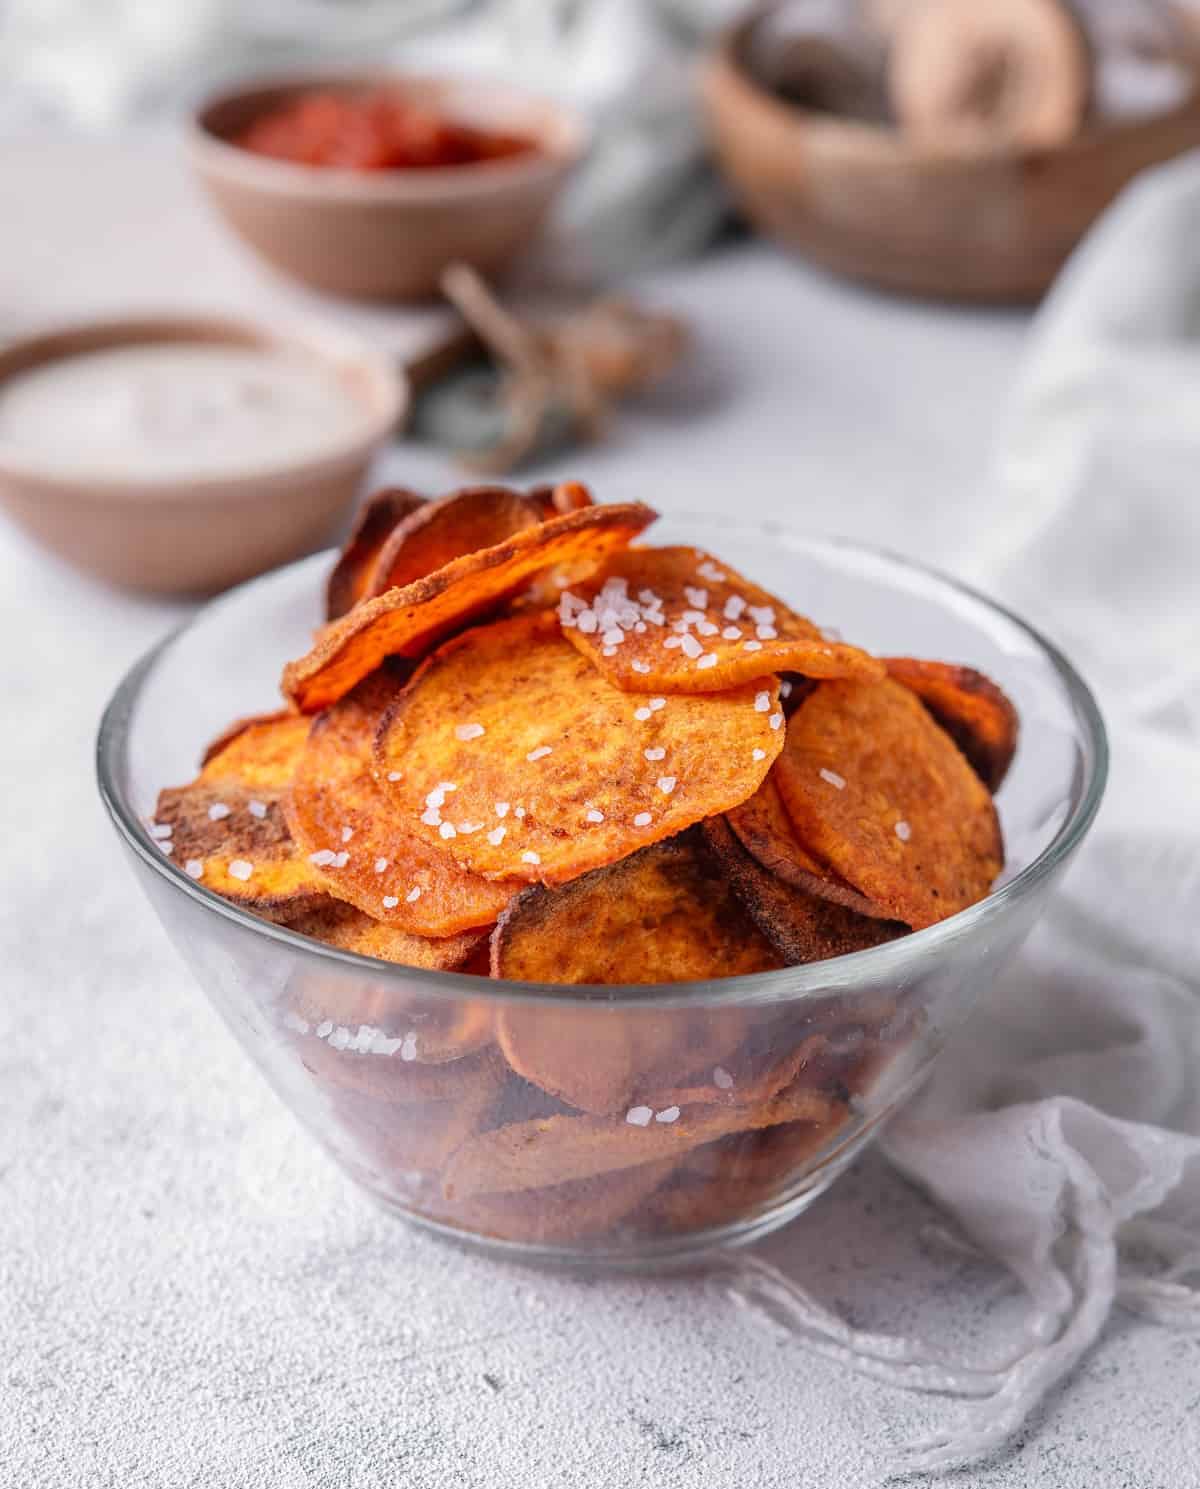 Spicy sweet potato chips